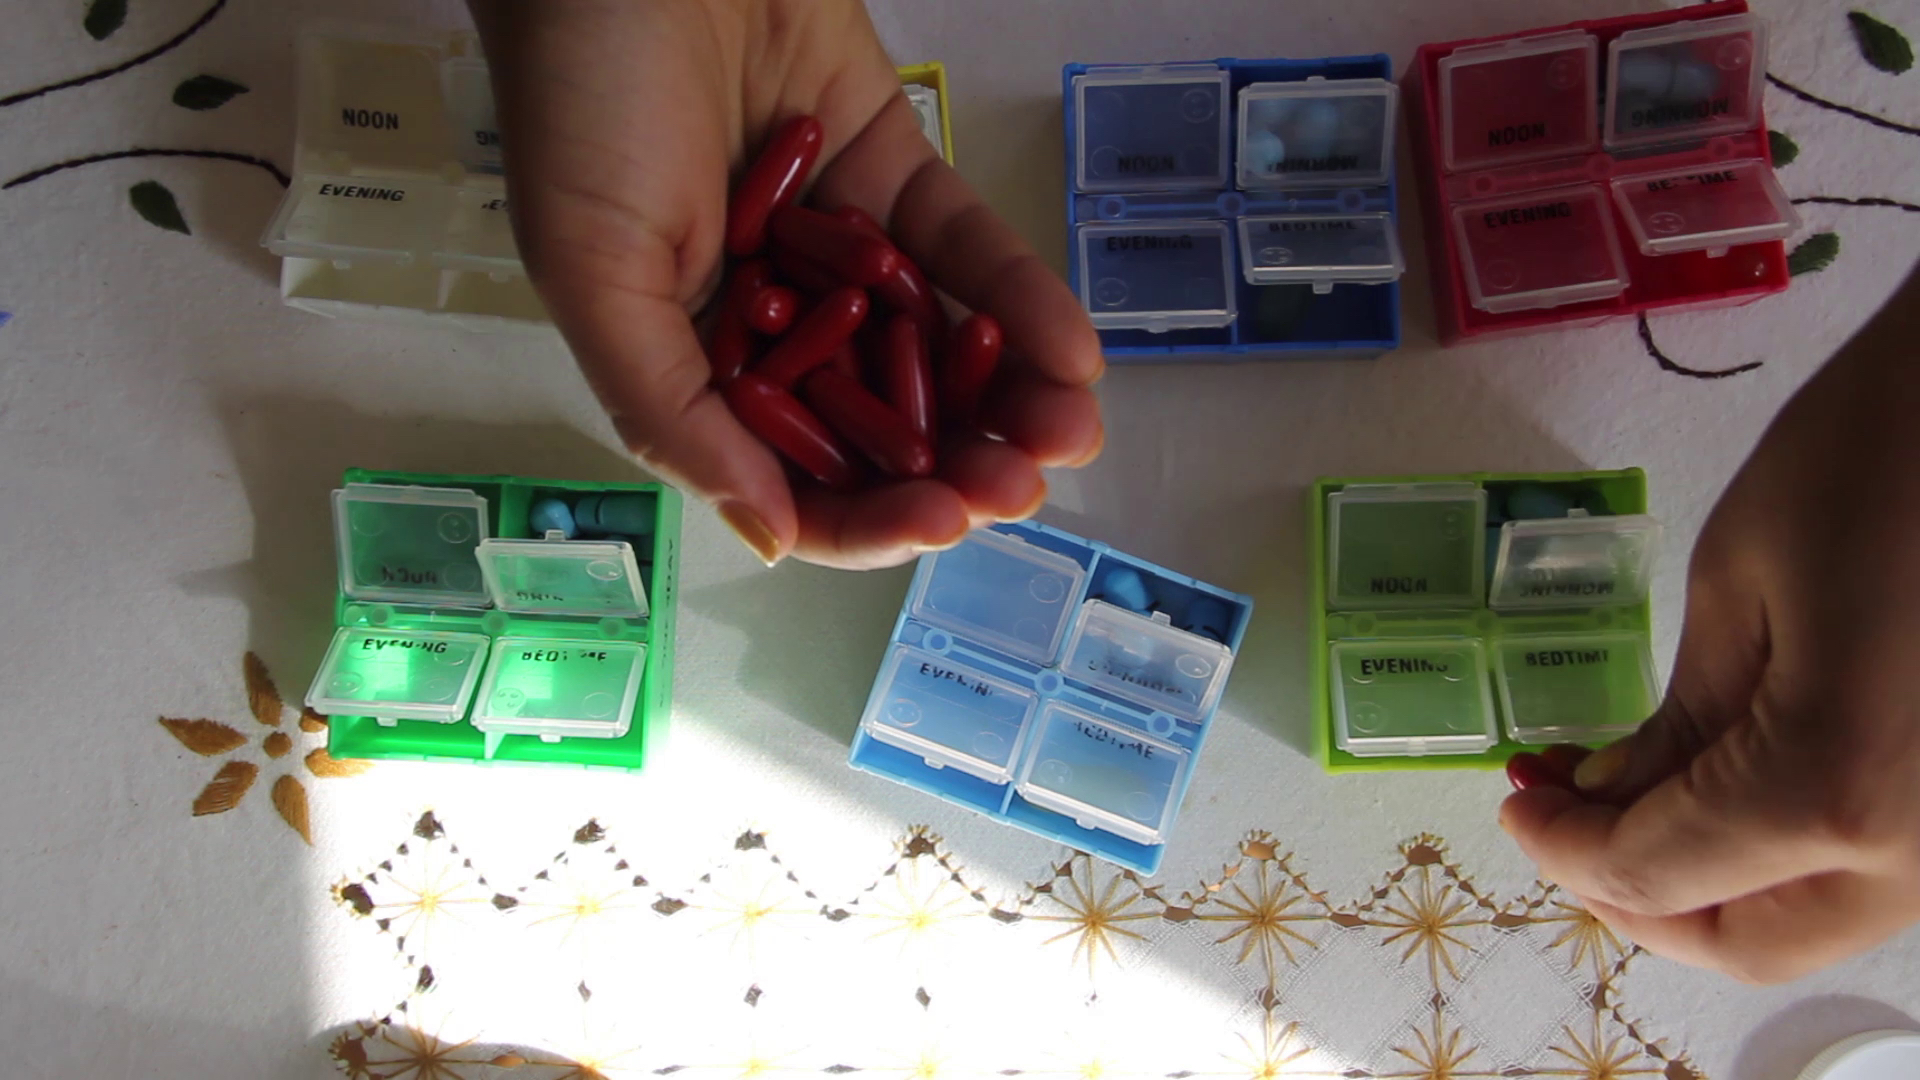 Two hands sort pills into seven brightly colored pill boxes on top of an embroidered cloth.